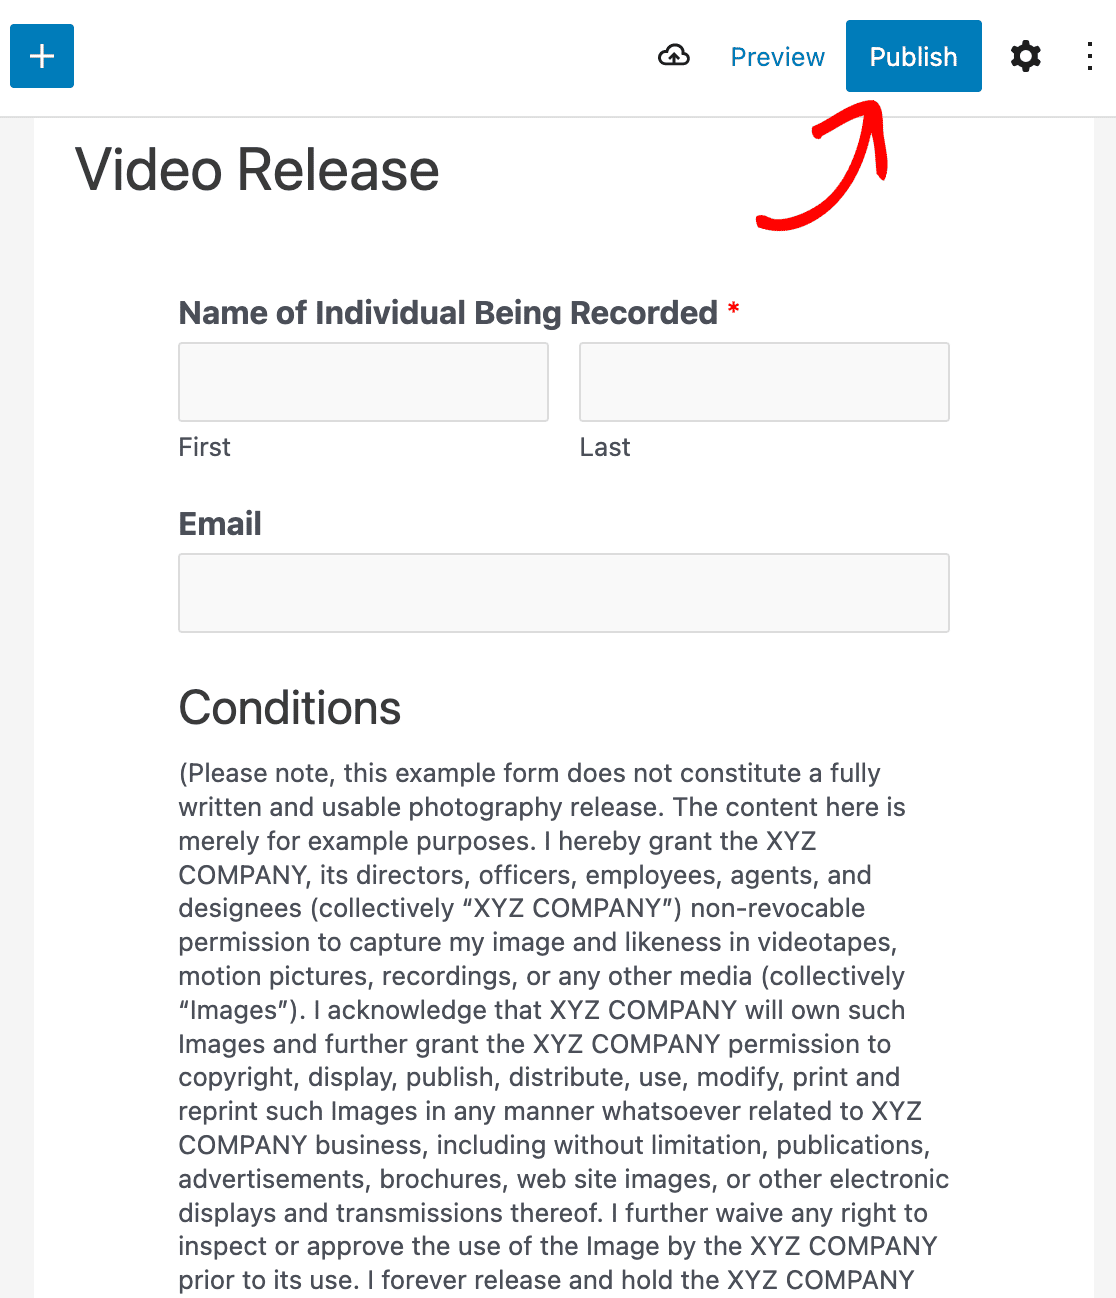 Publishing your video release form